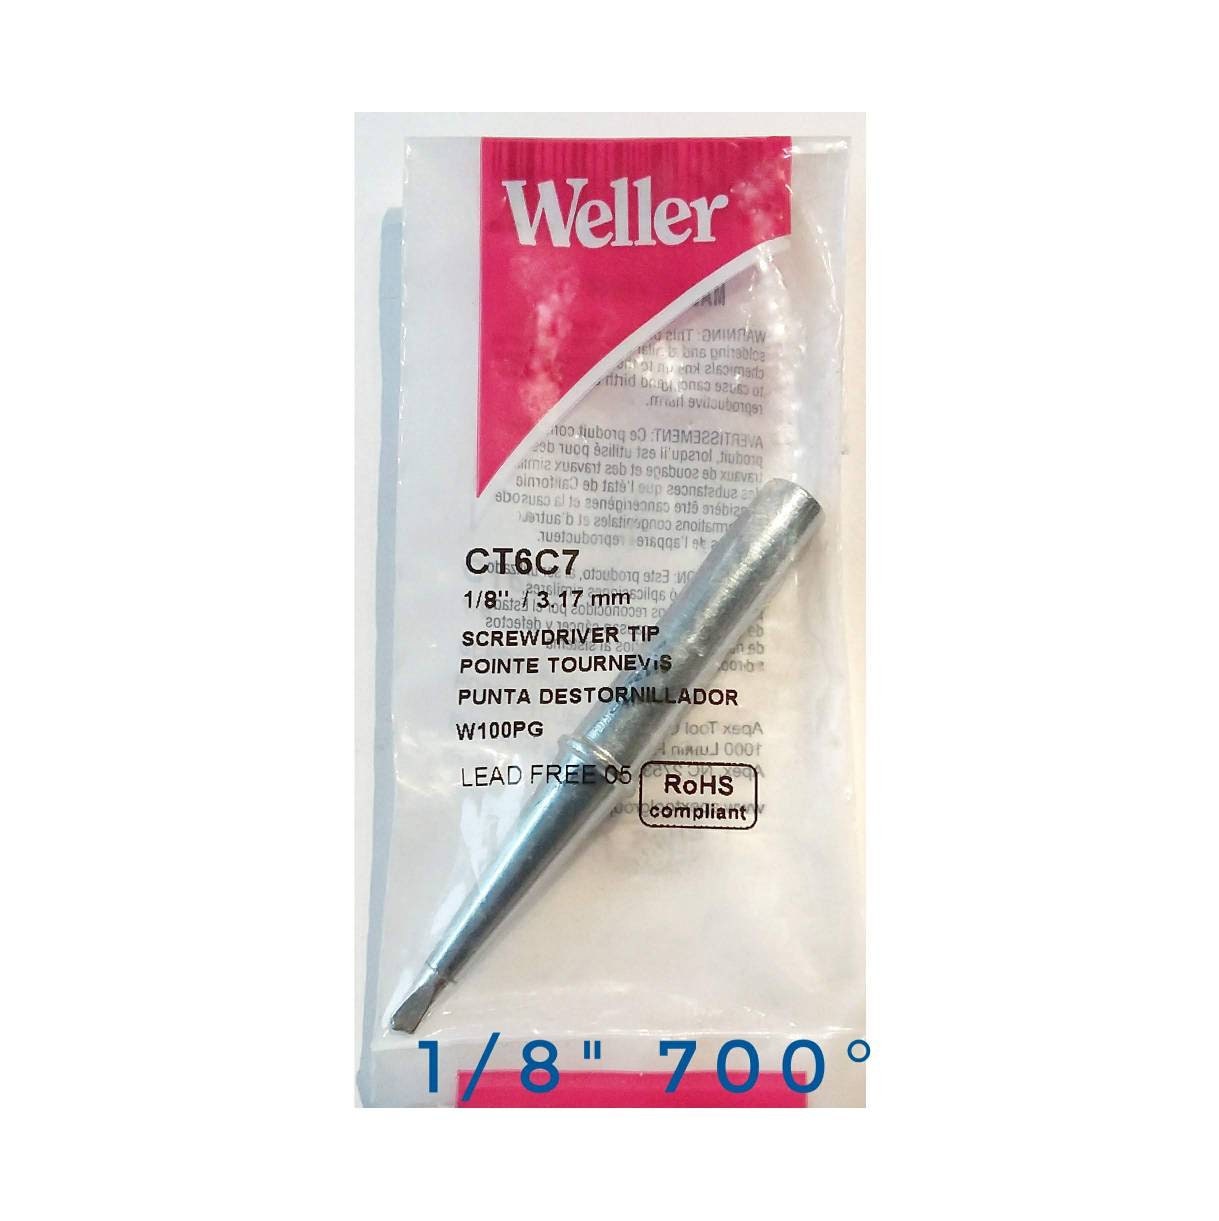 Soldering Iron Tip for Stained Glass, Jewelry Making, Wire or Metal Art Built-in temperature control 1/8" for Weller 100PG Iron